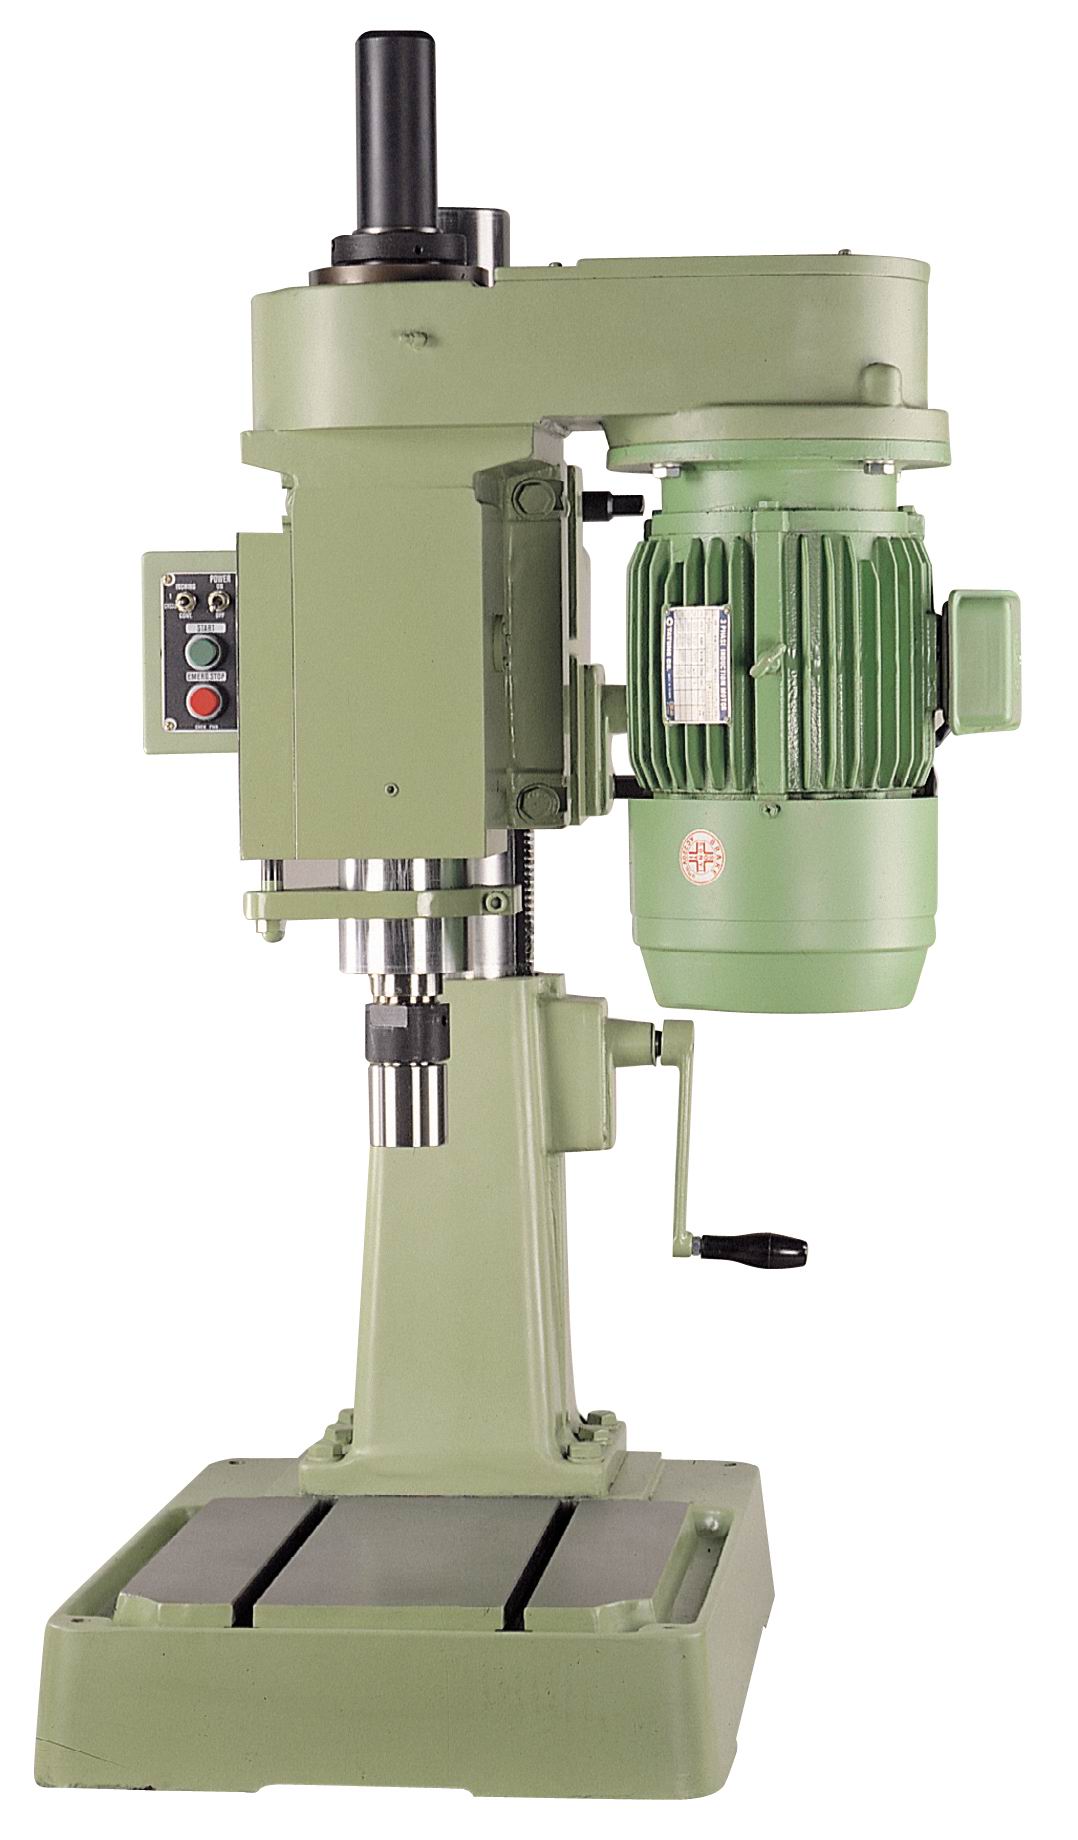 Auto Lead Screw Tapping Machine-CLS-40GF, CLS-80GF, CLS-40GFV, CLS-80GFV